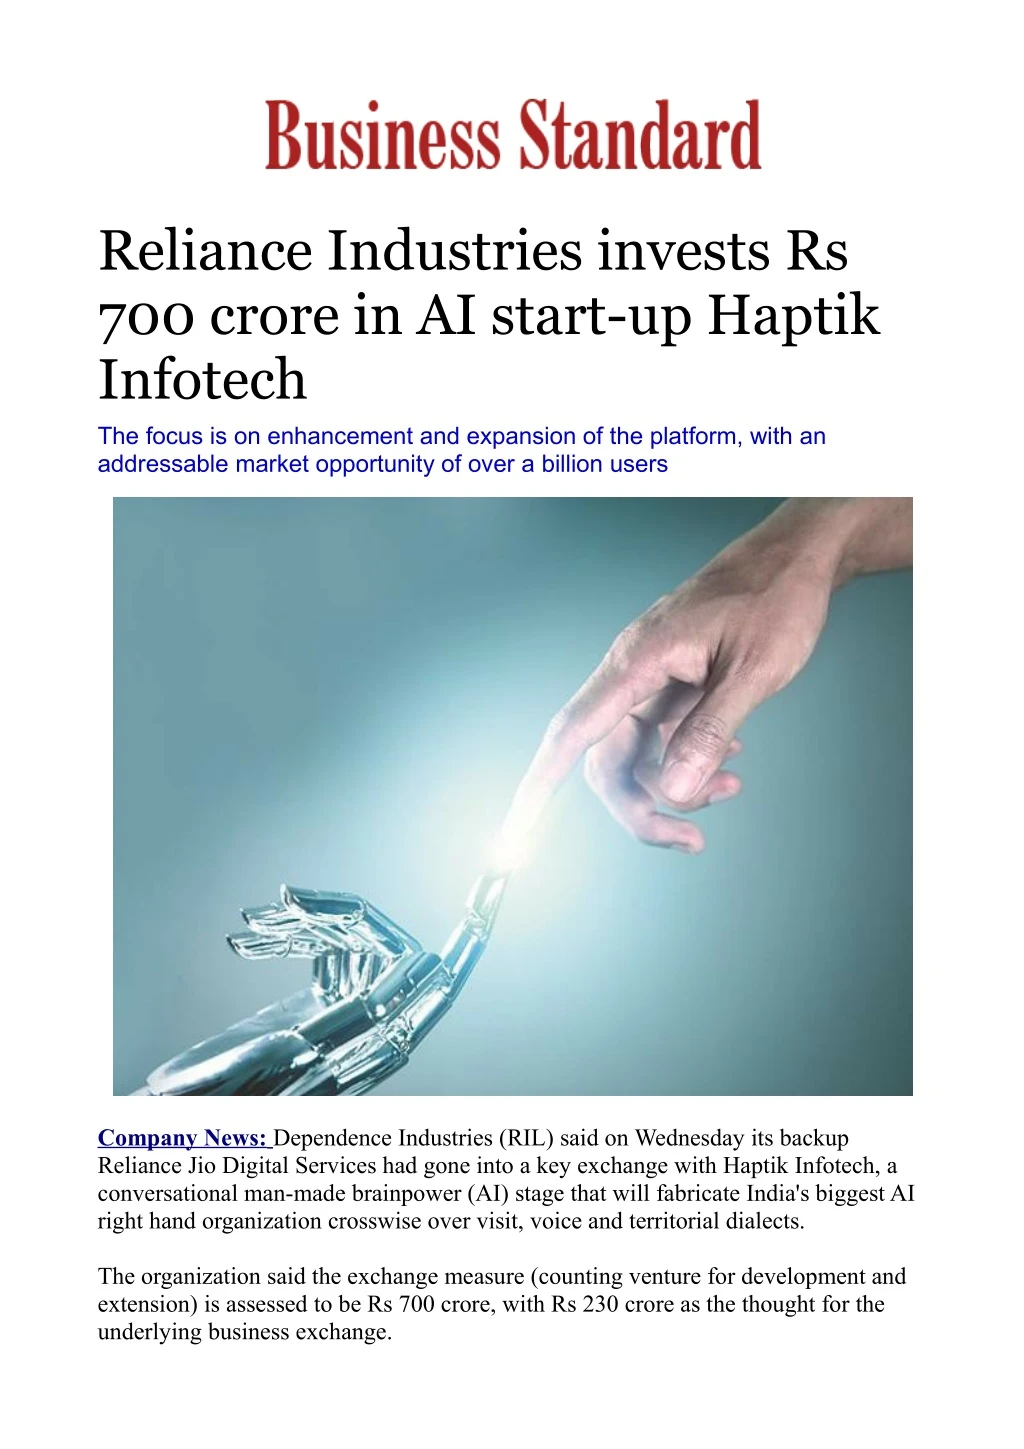 reliance industries invests rs 700 crore